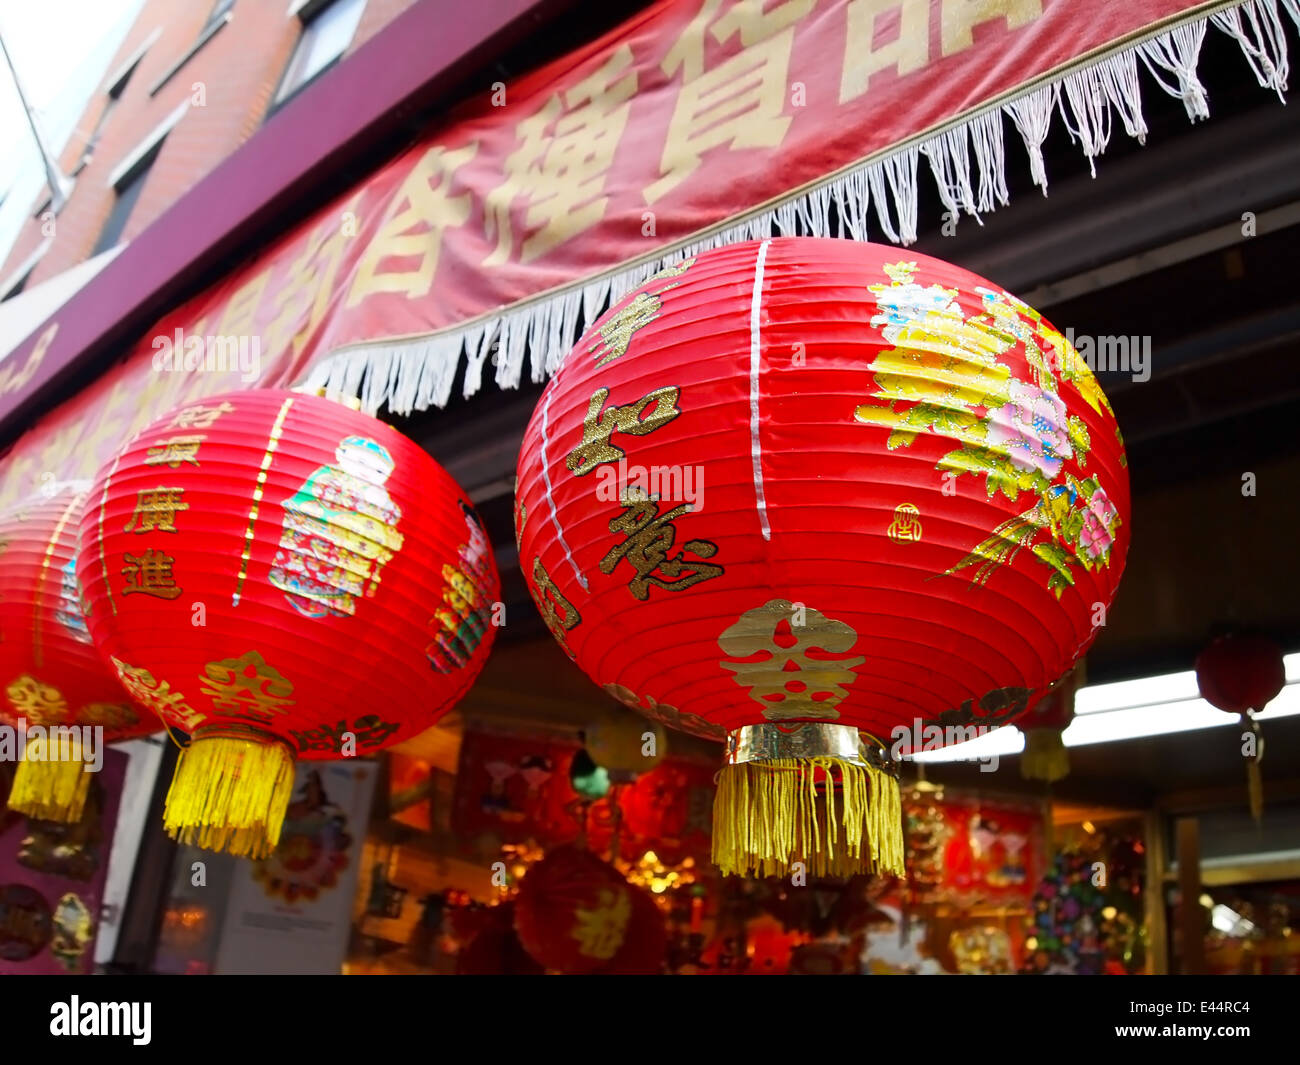 A few brightly decorated red paper Chinese lanterns hang in the front of a souvenir shop in Chinatown, NYC. Stock Photo